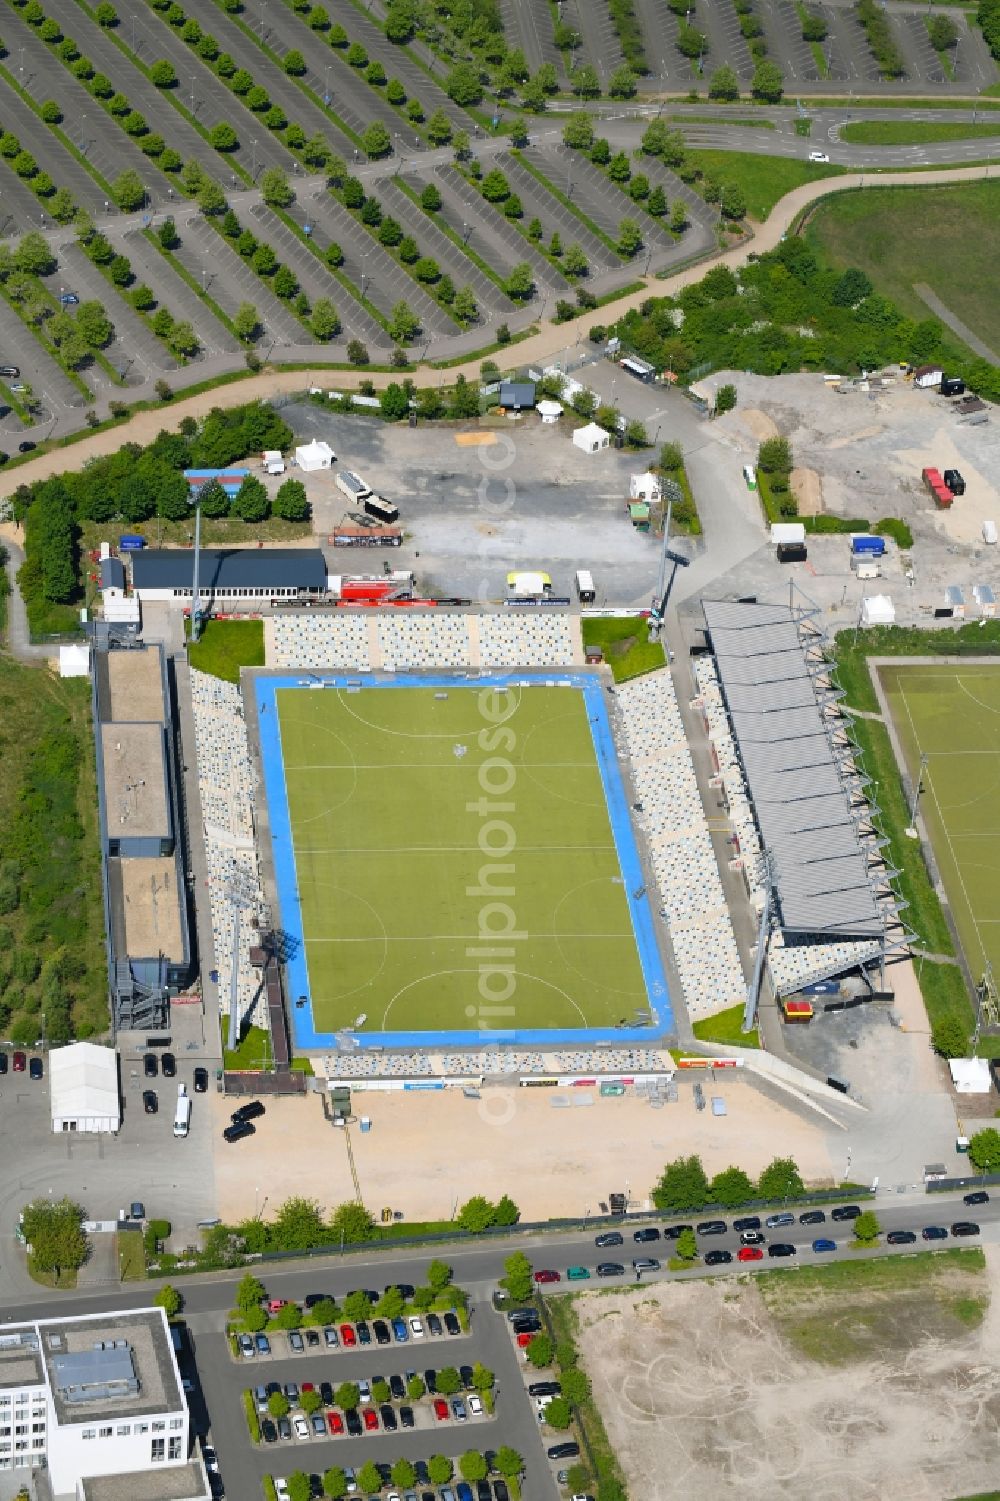 Aerial photograph Mönchengladbach - Sports facility grounds of the Arena stadium SparkassenPark Moenchengladbach Am Hockeypark in Moenchengladbach in the state North Rhine-Westphalia, Germany